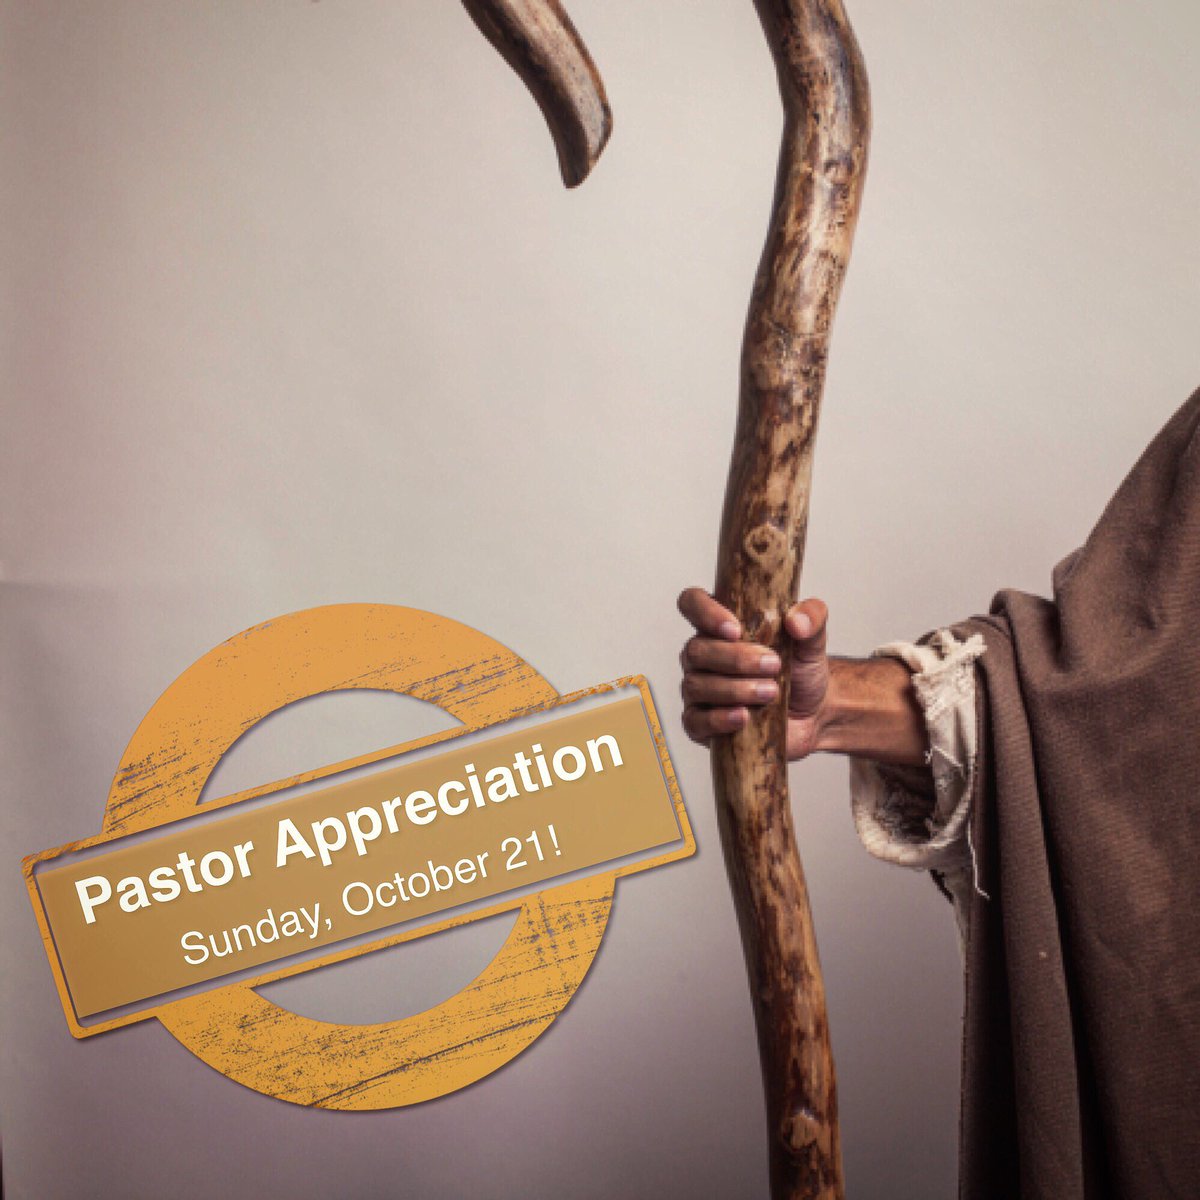 Greetings CPC don’t forget about our Pastors Appreciation Sunday on October 21st. Please write an encouraging card for our pastors & celebrate the many retired pastors we have at CPC in our congregation! #cpcgoodyear #ecochurch #pastorappreciationmonth #goodyearaz #phoenixchurch